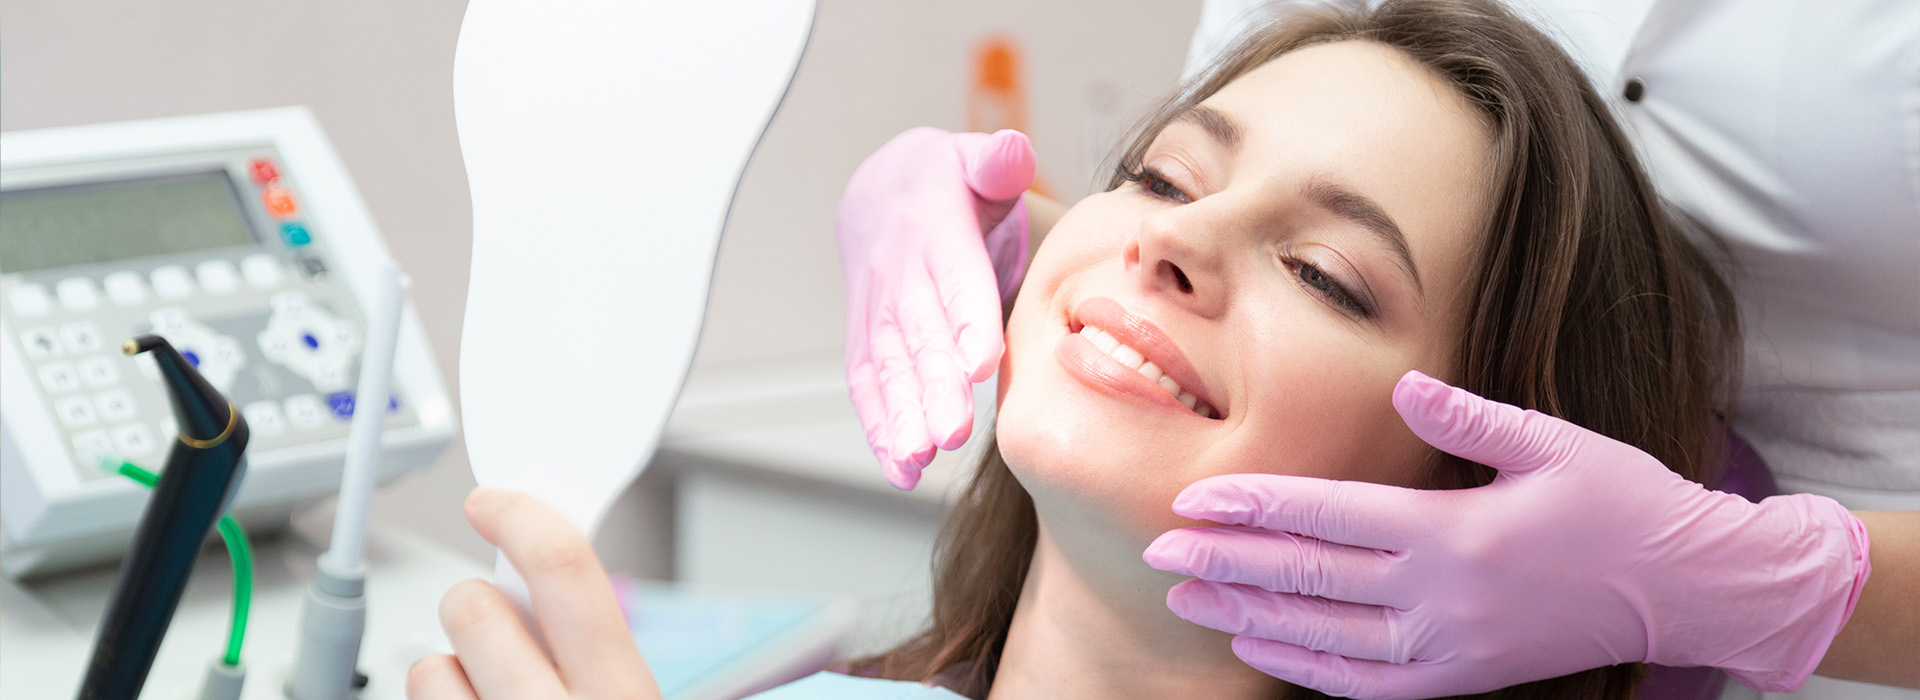 Bronx Wellness Family Dental | Dental Cleanings, Extractions and Implant Dentistry